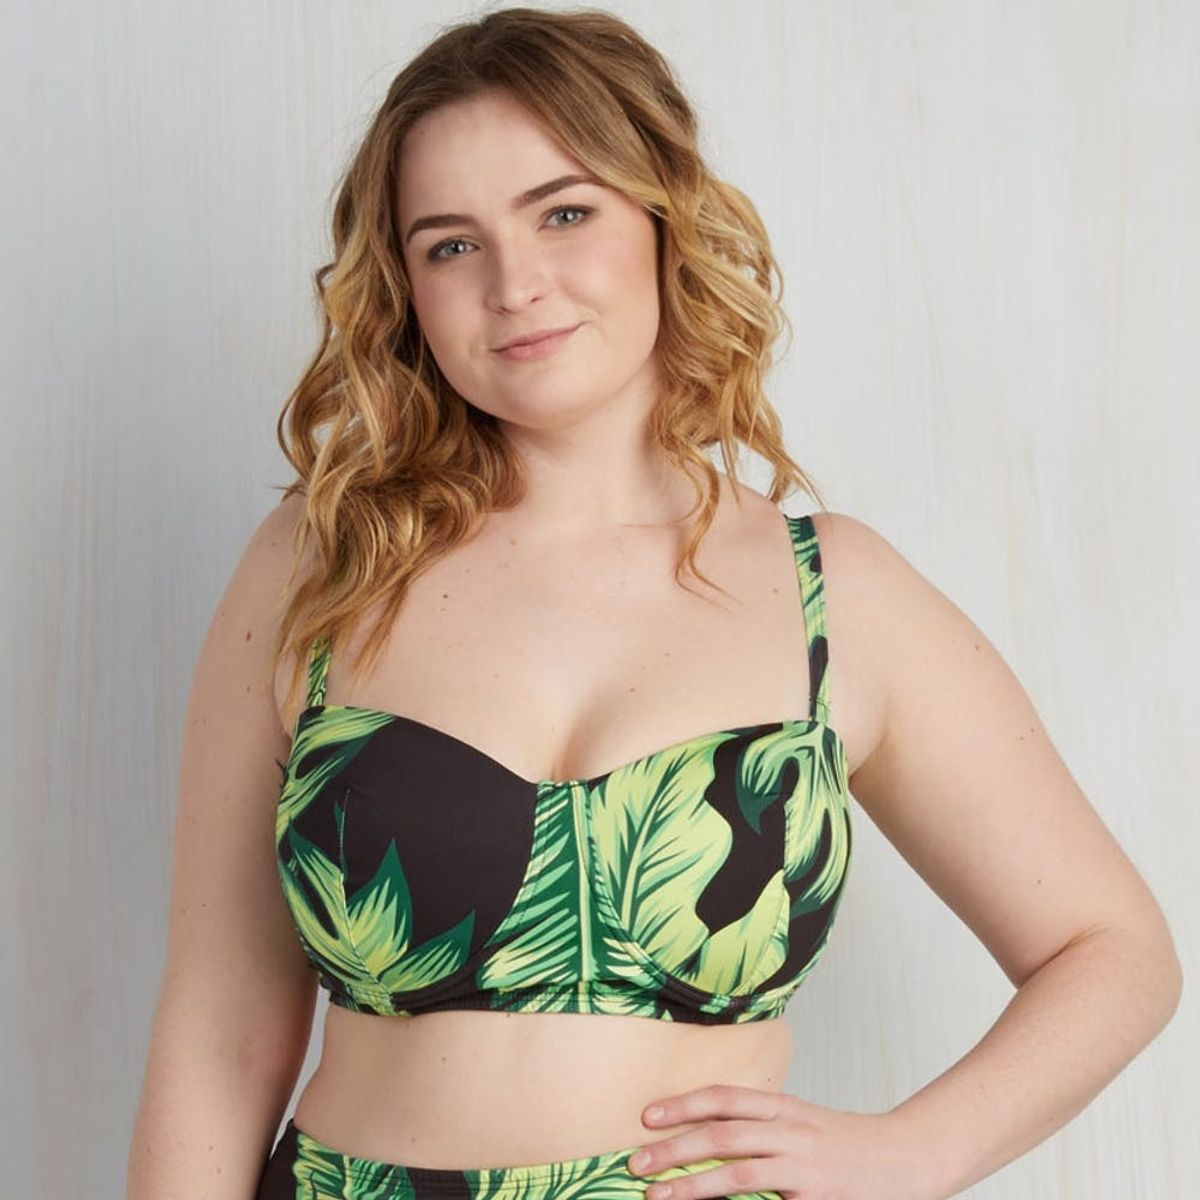 ModCloth Just Launched an A+ Inclusive Swimwear Line